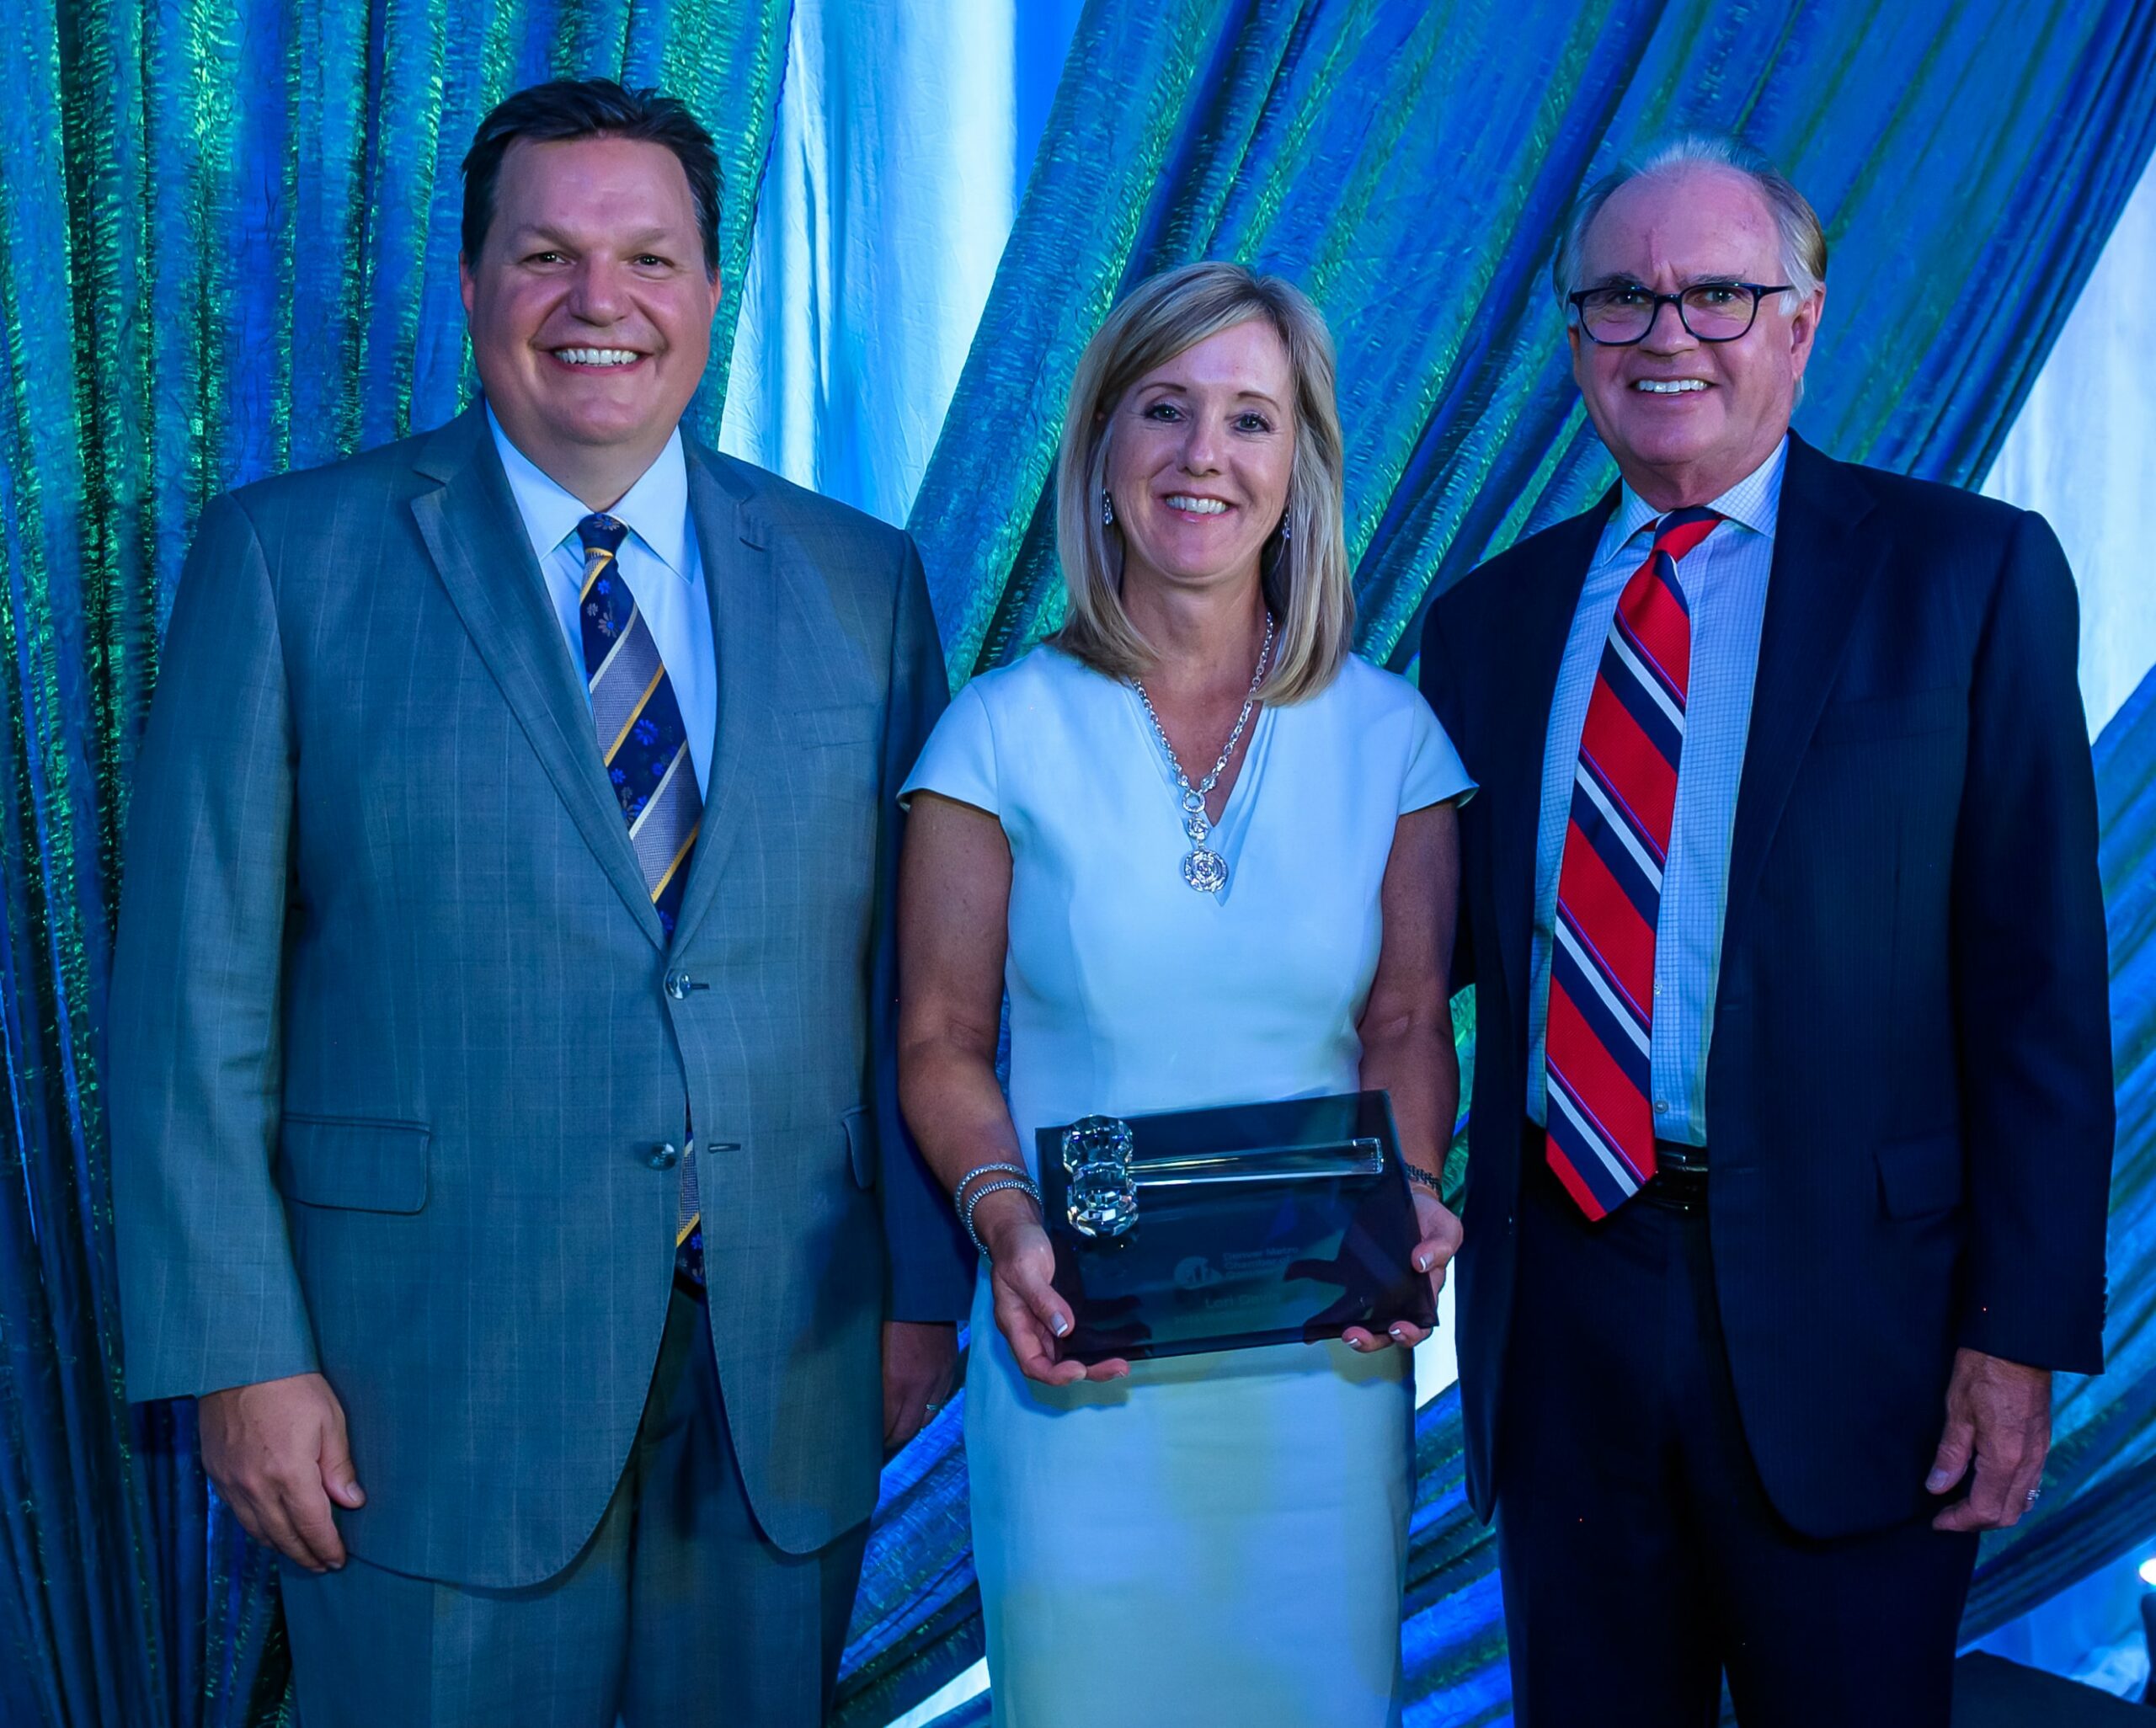 Chamber President & CEO, J. J. Ament; Incoming Chamber Board Chair, Lori Davis, holding the gavel; and outgoing Chamber Board Chair, George Sparks